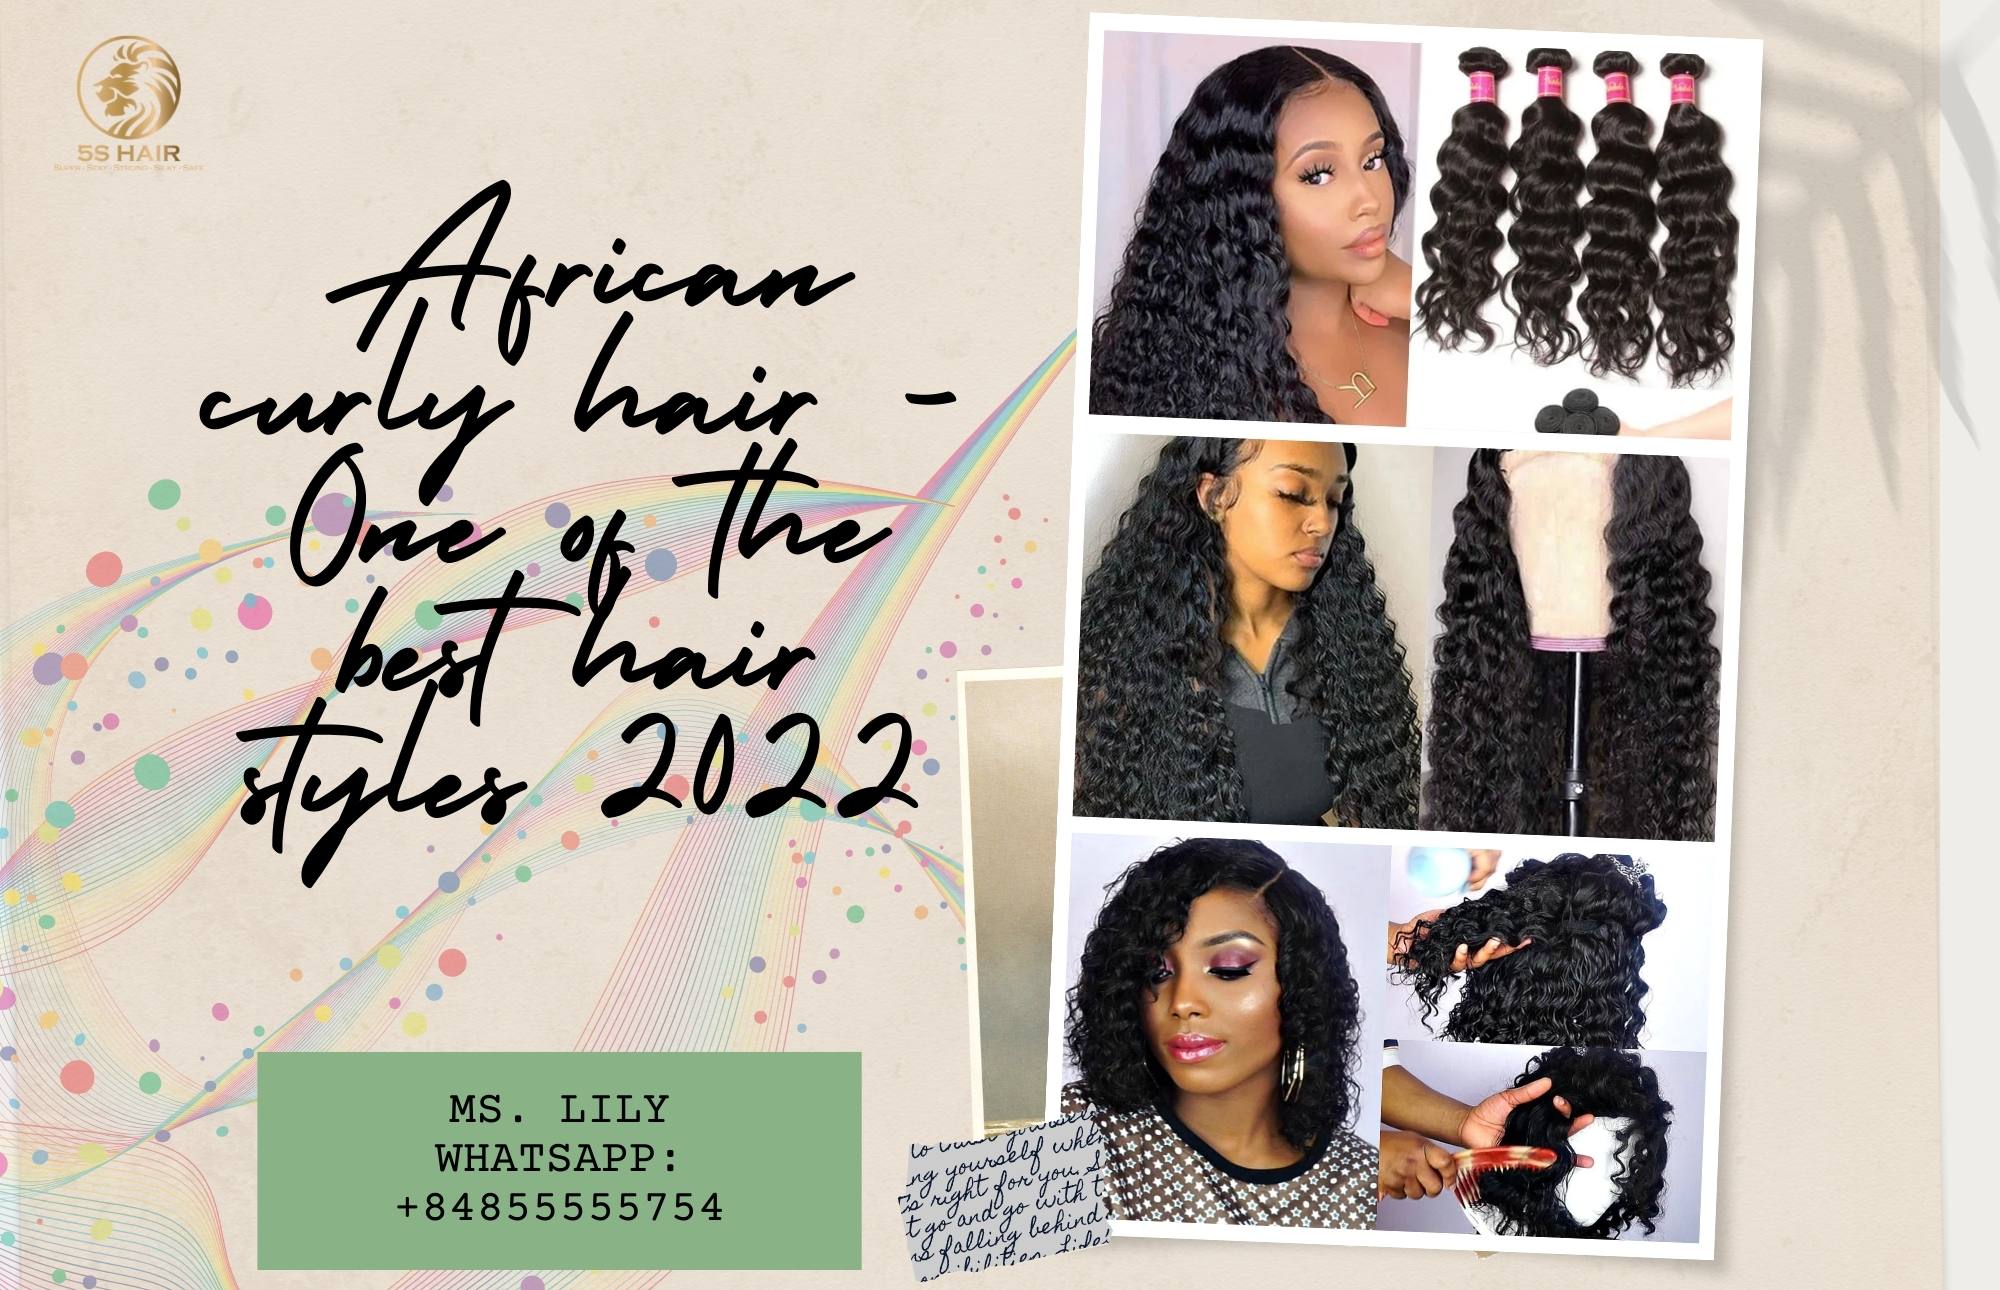 African curly hair - One of the best hair styles 2022